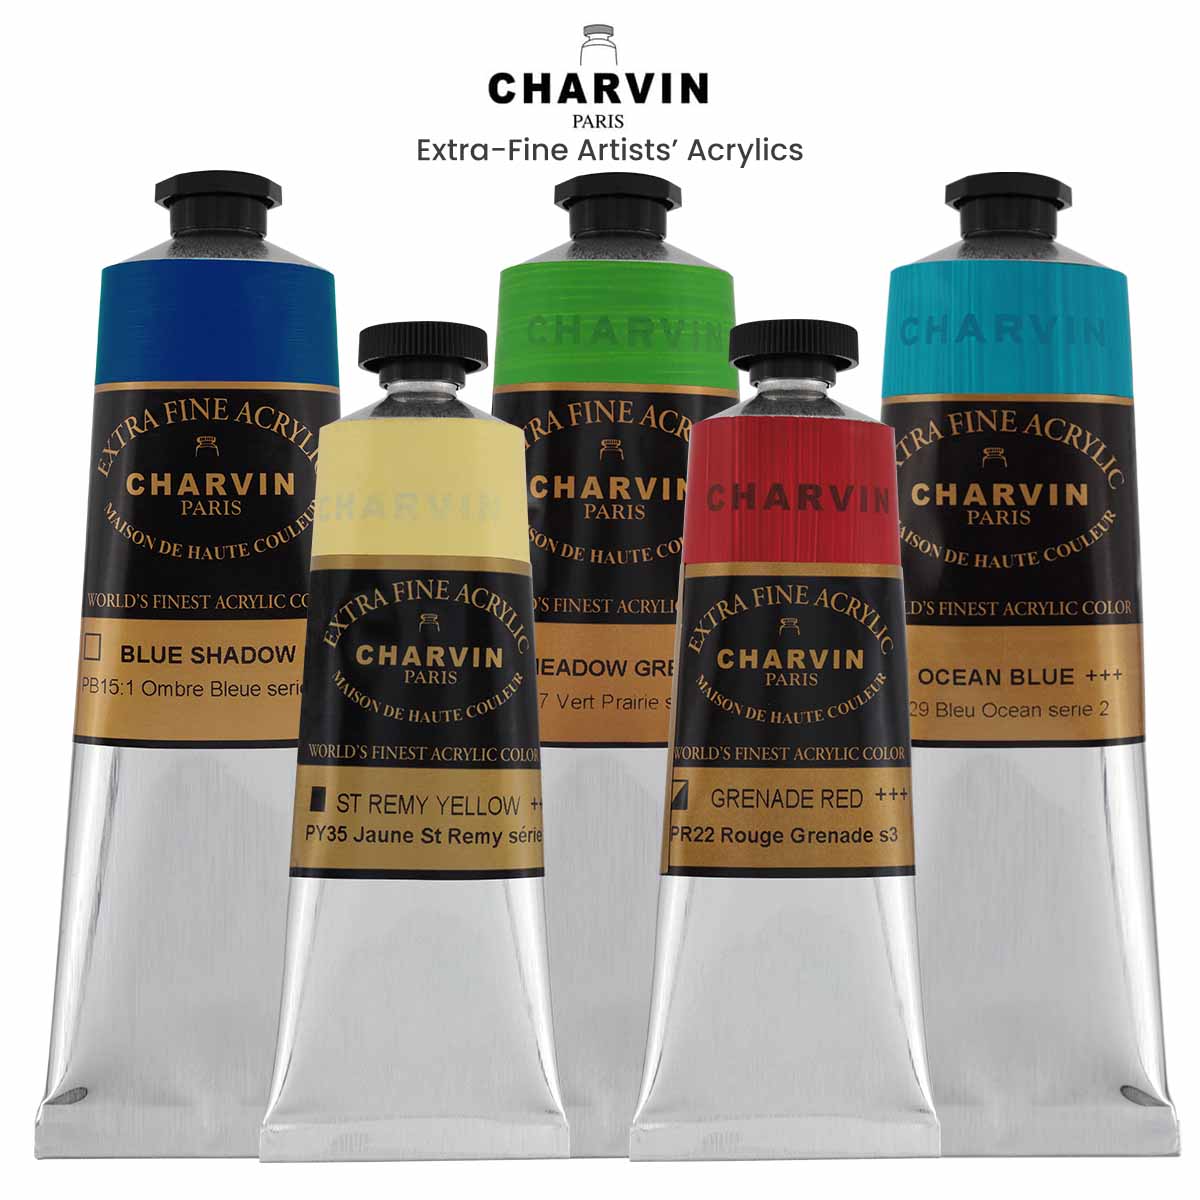 Charvin Extra-Fine Artists' Acrylic Paints - 60ml & 150ml tubes